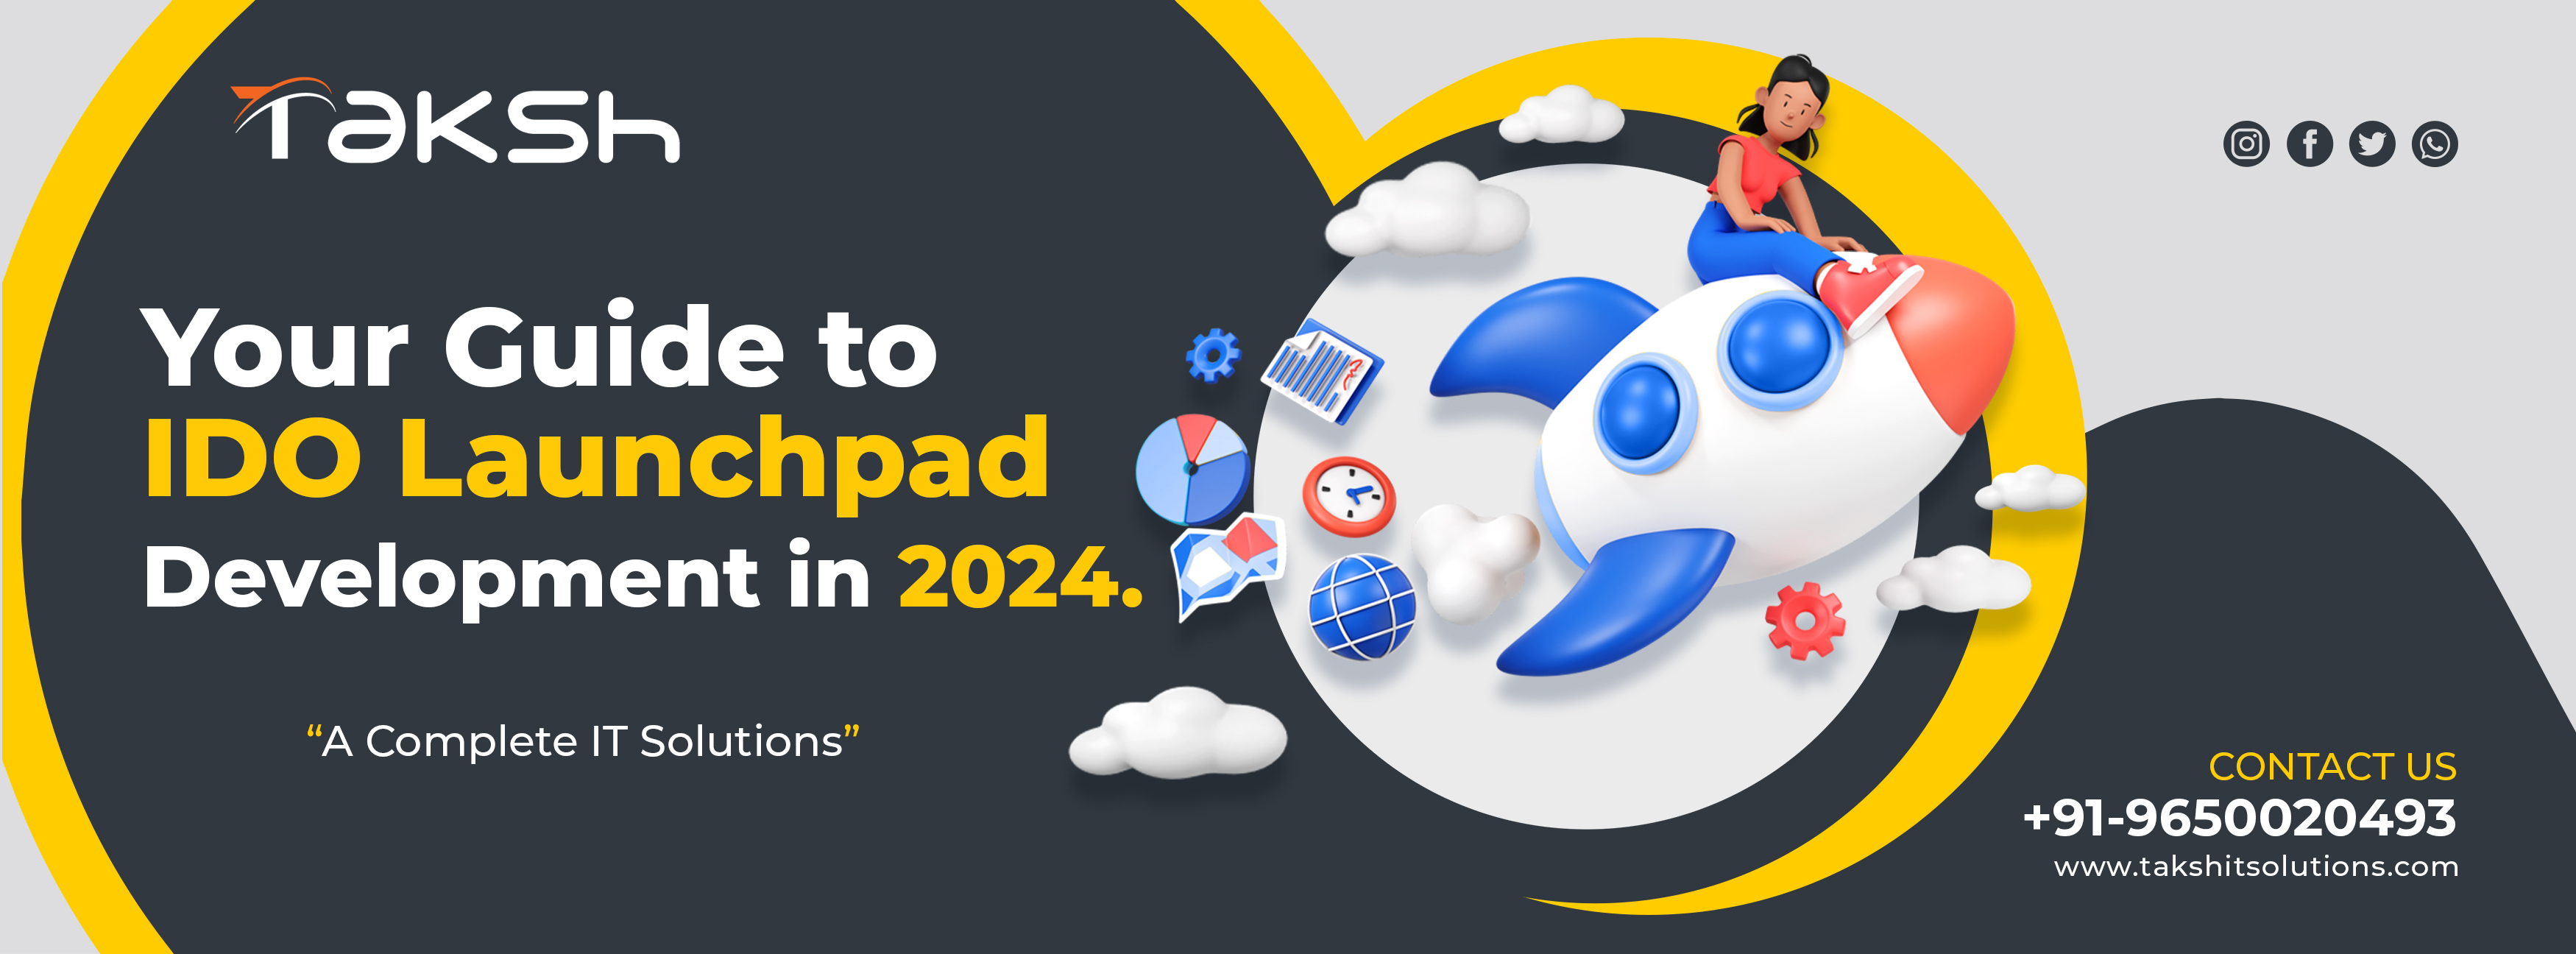 Your Guide to IDO Launchpad Development in 2024 | Taksh IT Solutions Private Limited